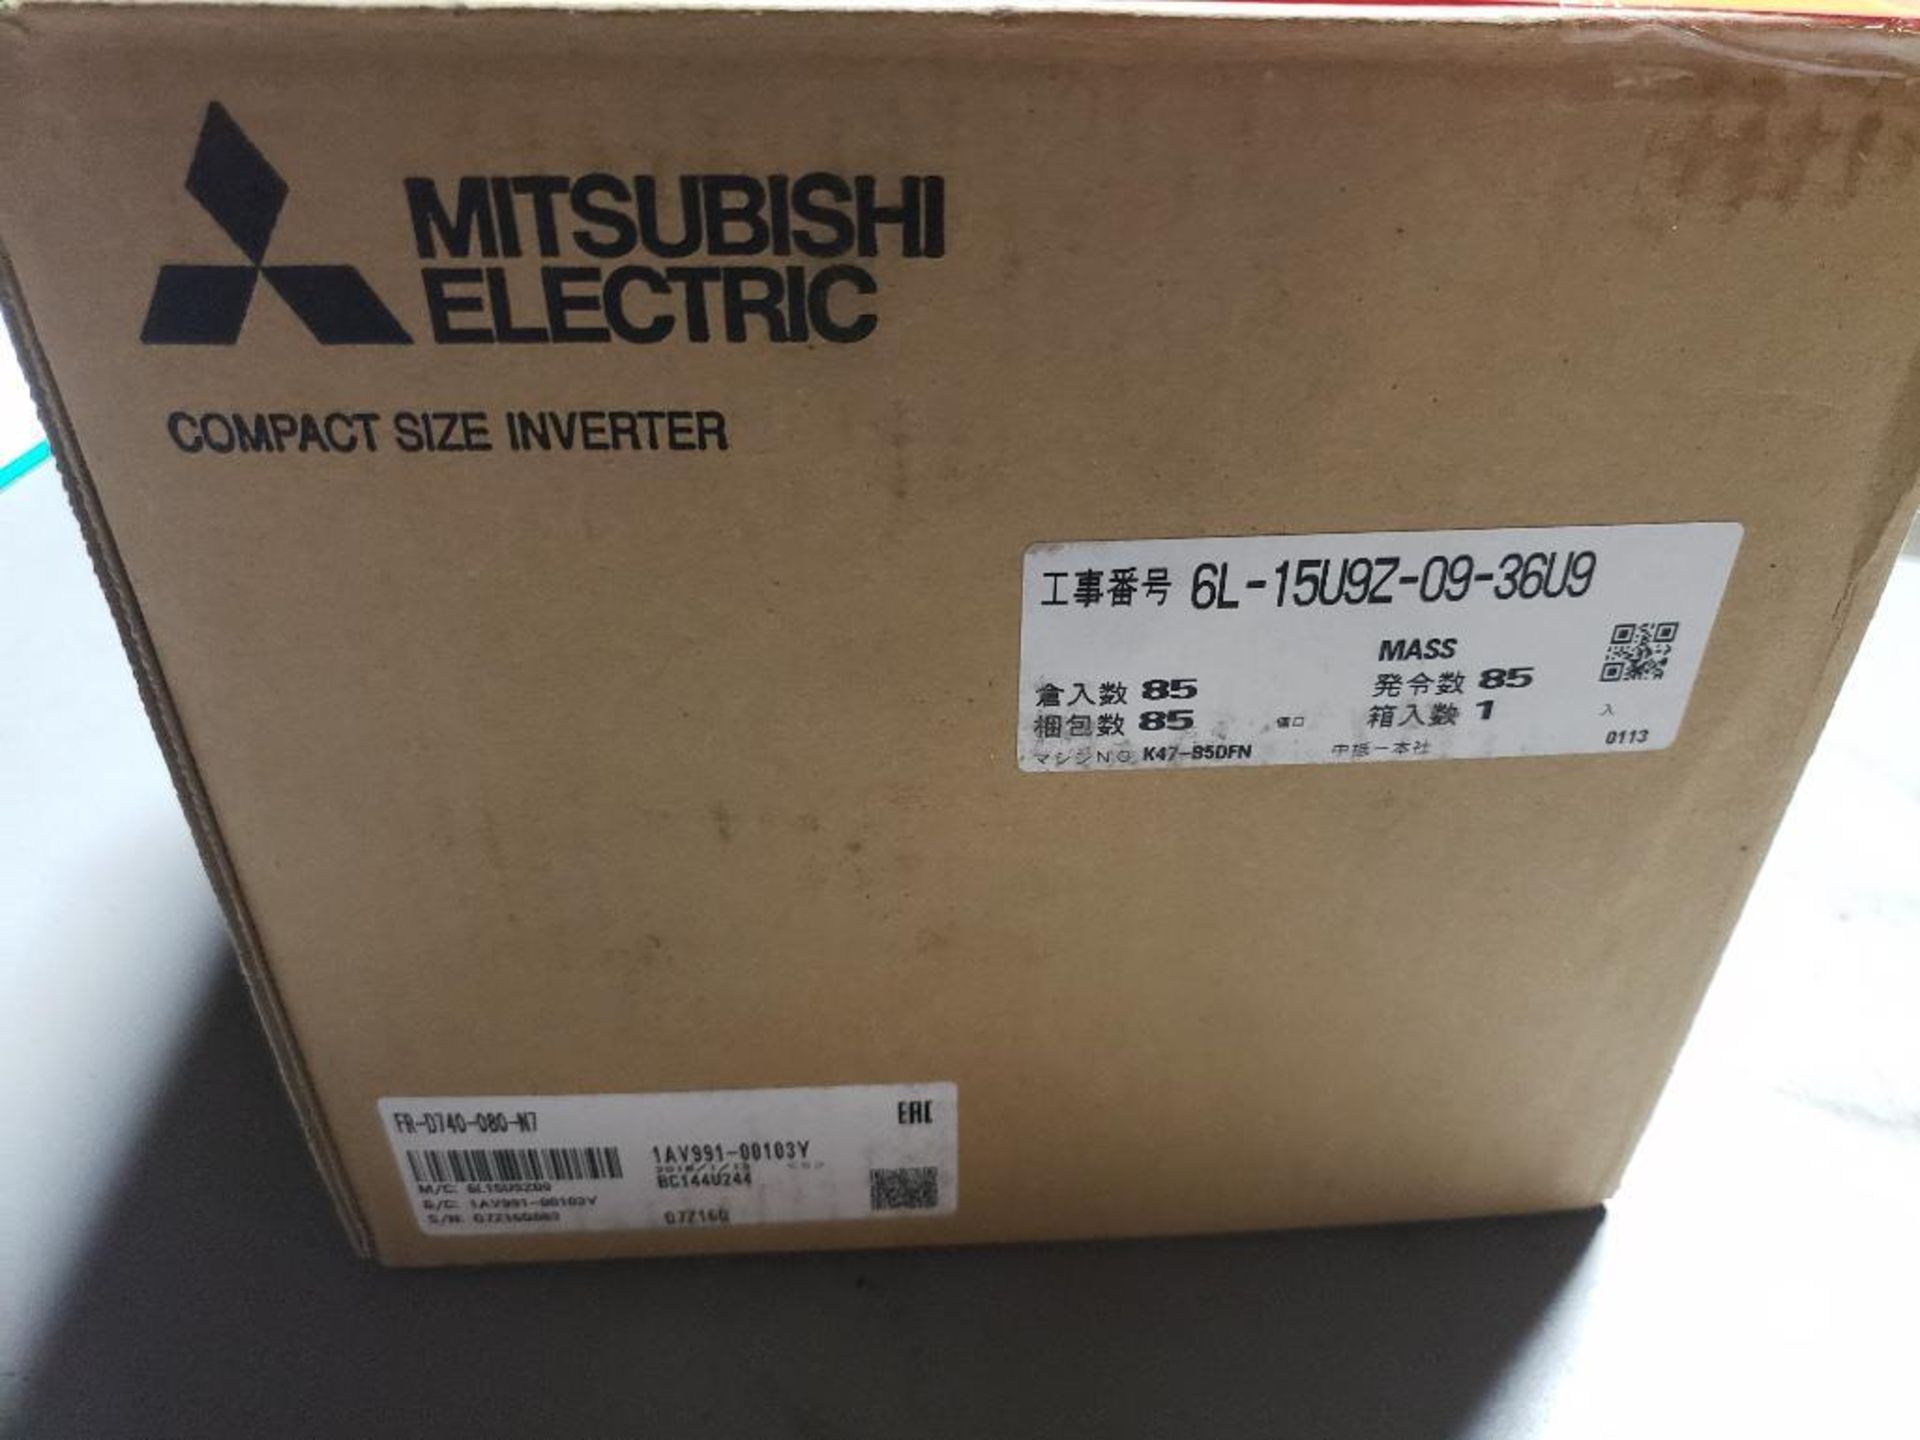 Mitsubishi inverter drive. Part number FR-D740-080-N7. New in box. - Image 2 of 3